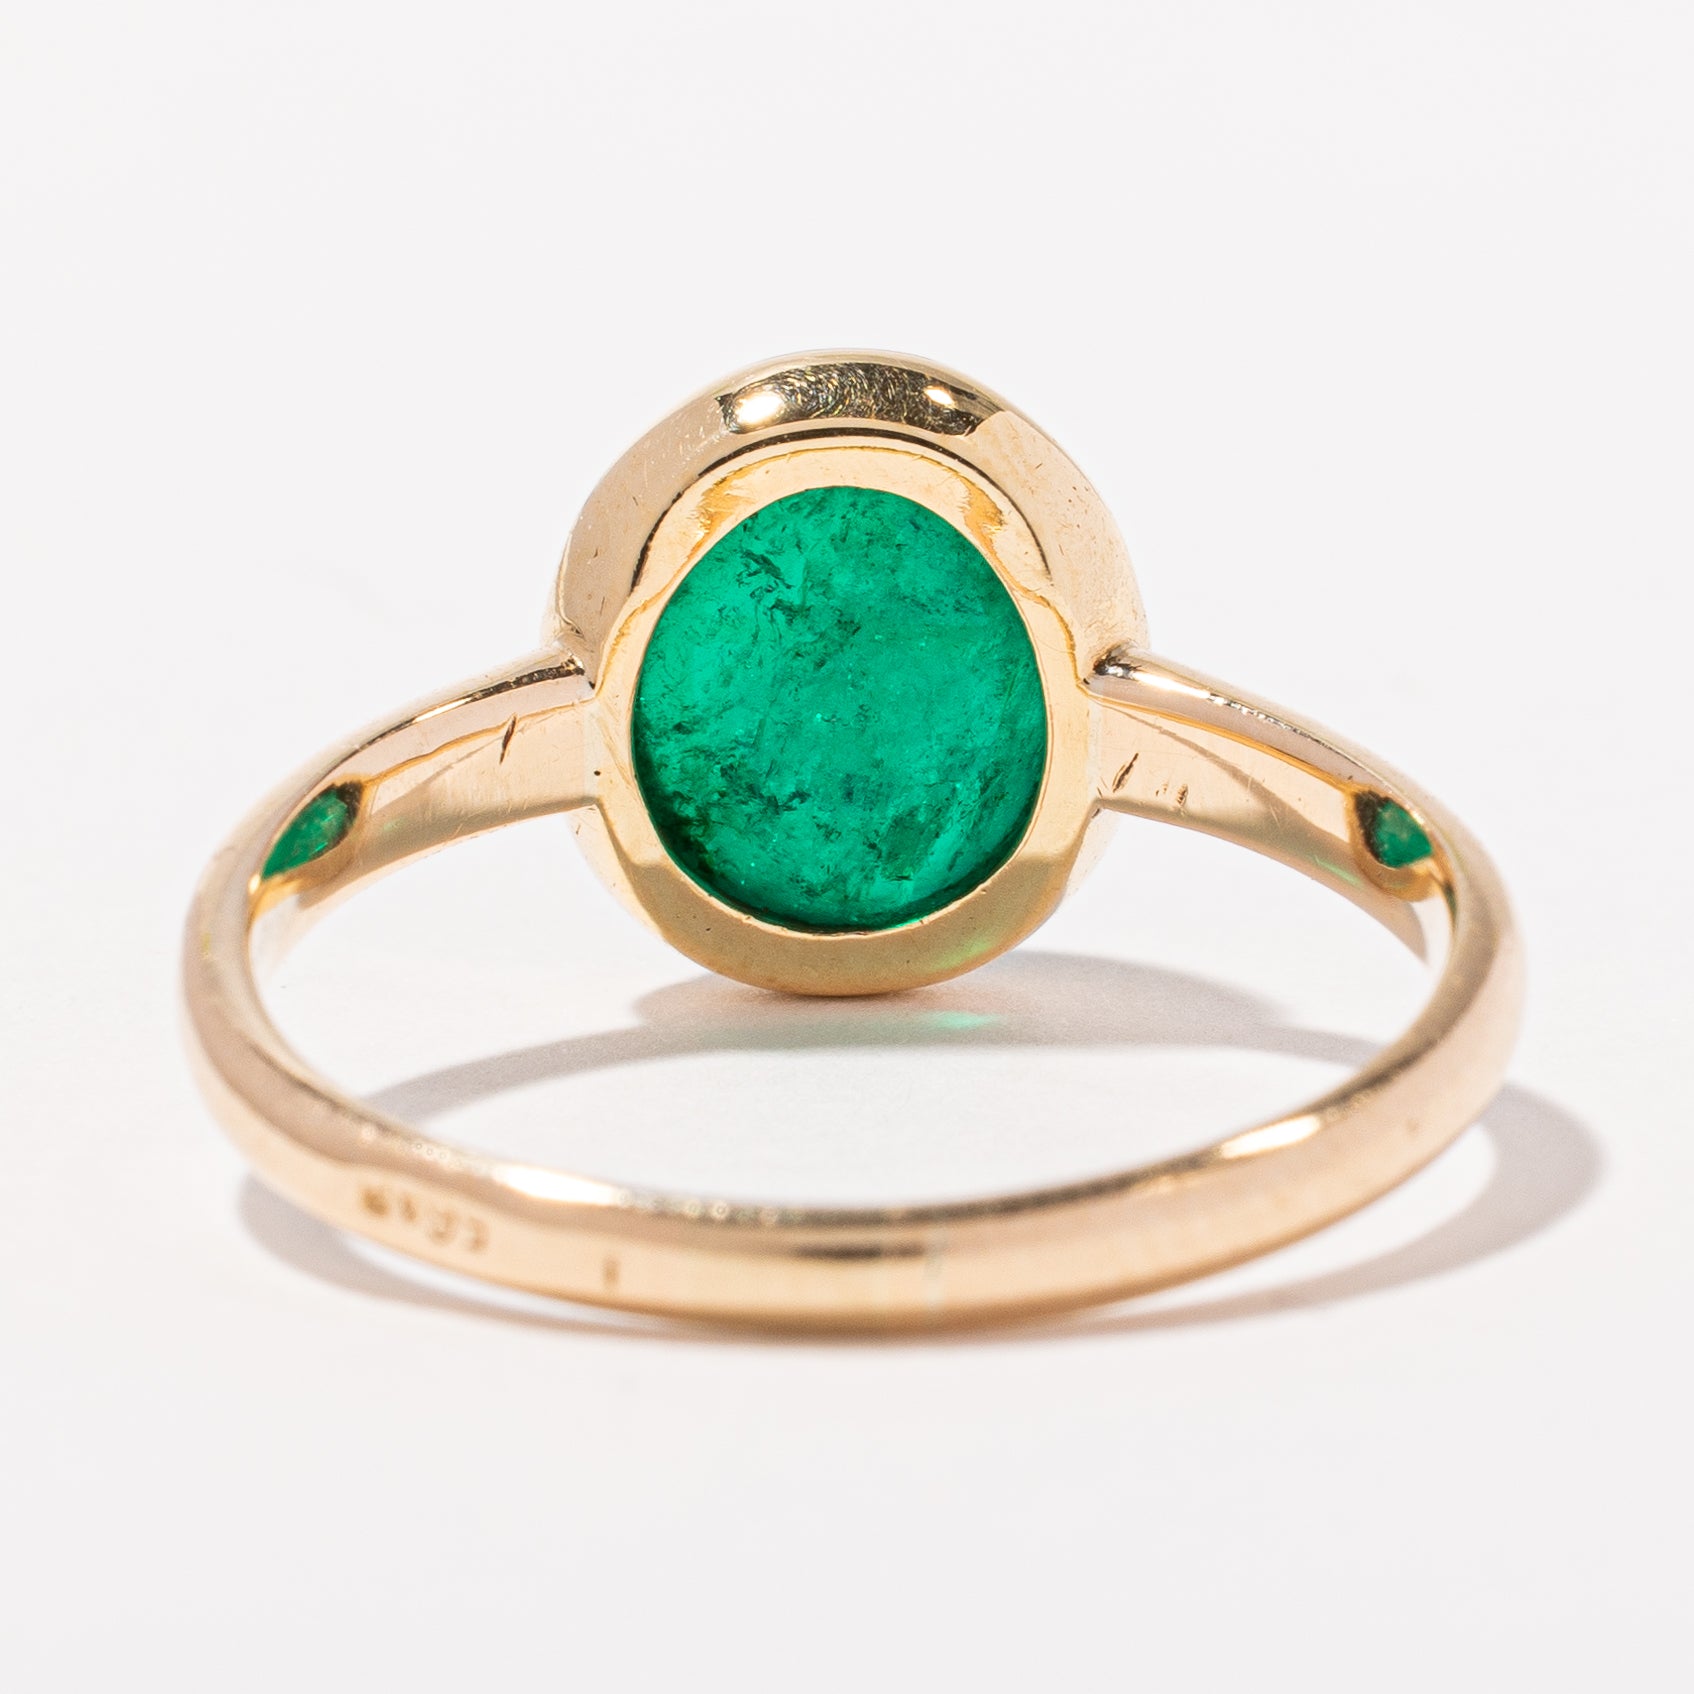 Cabochon Emerald Cocktail Ring | 4.20ct | SZ 8.25 |